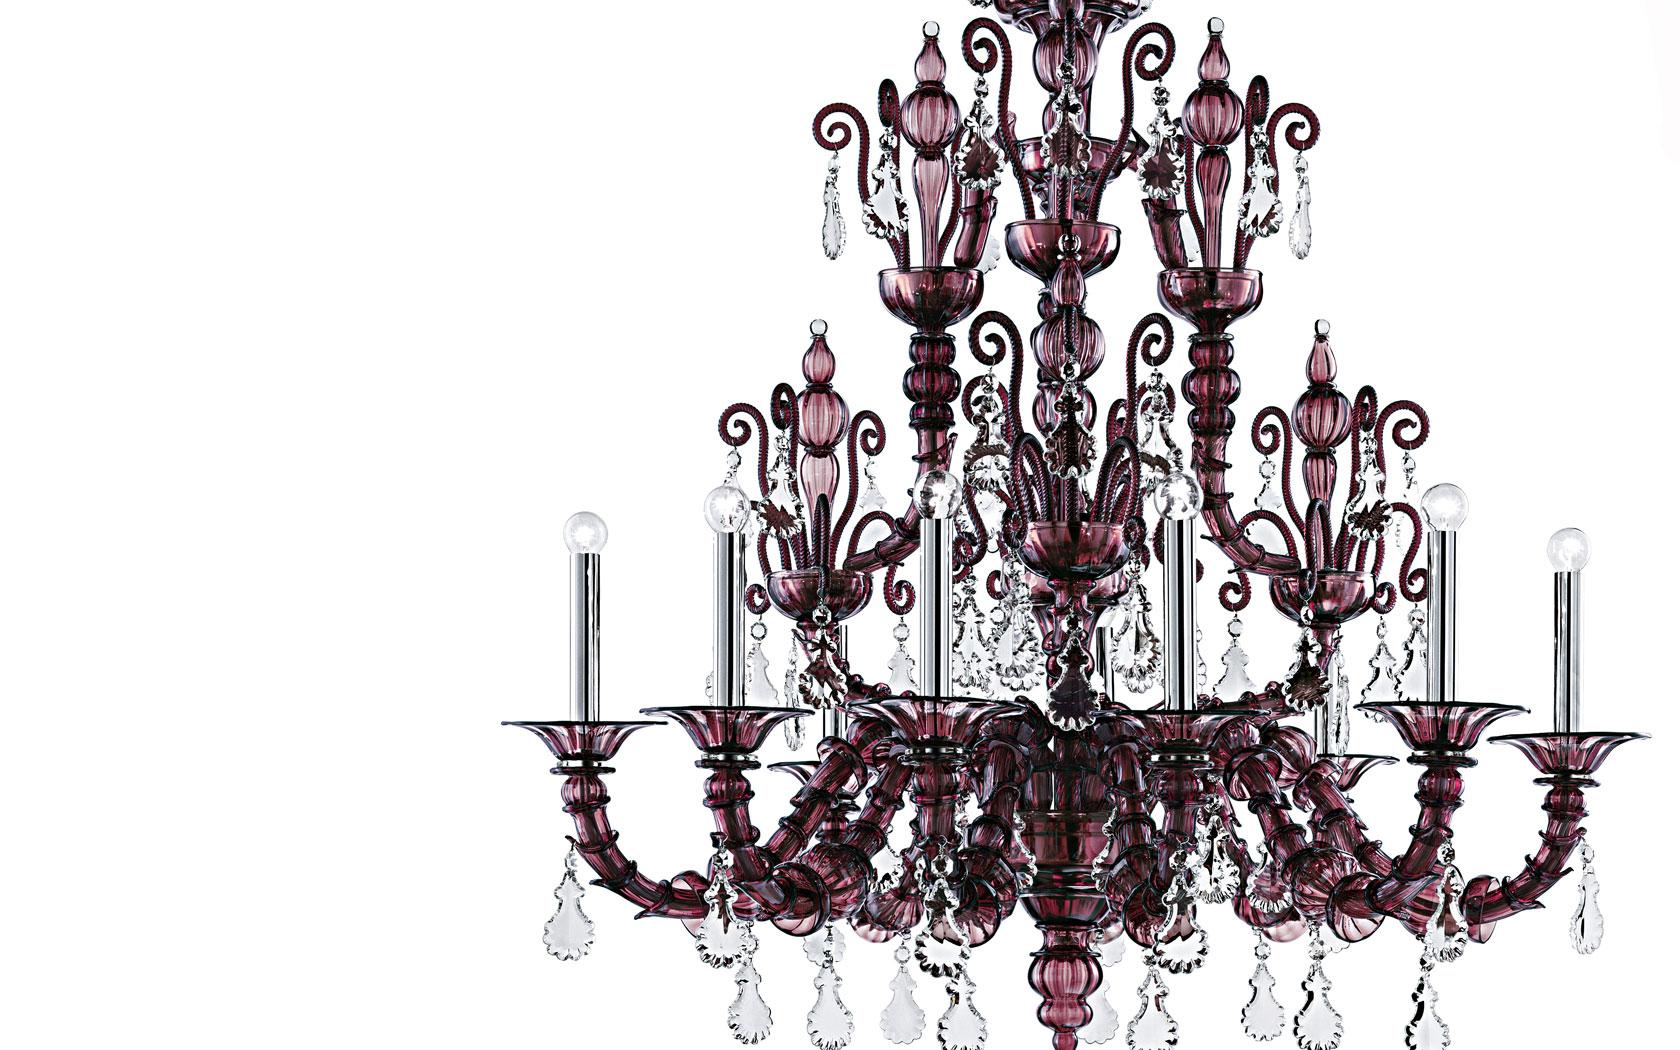 Gold Plate Taif 5350 12 Chandelier in Gold Glass, by Barovier&Toso